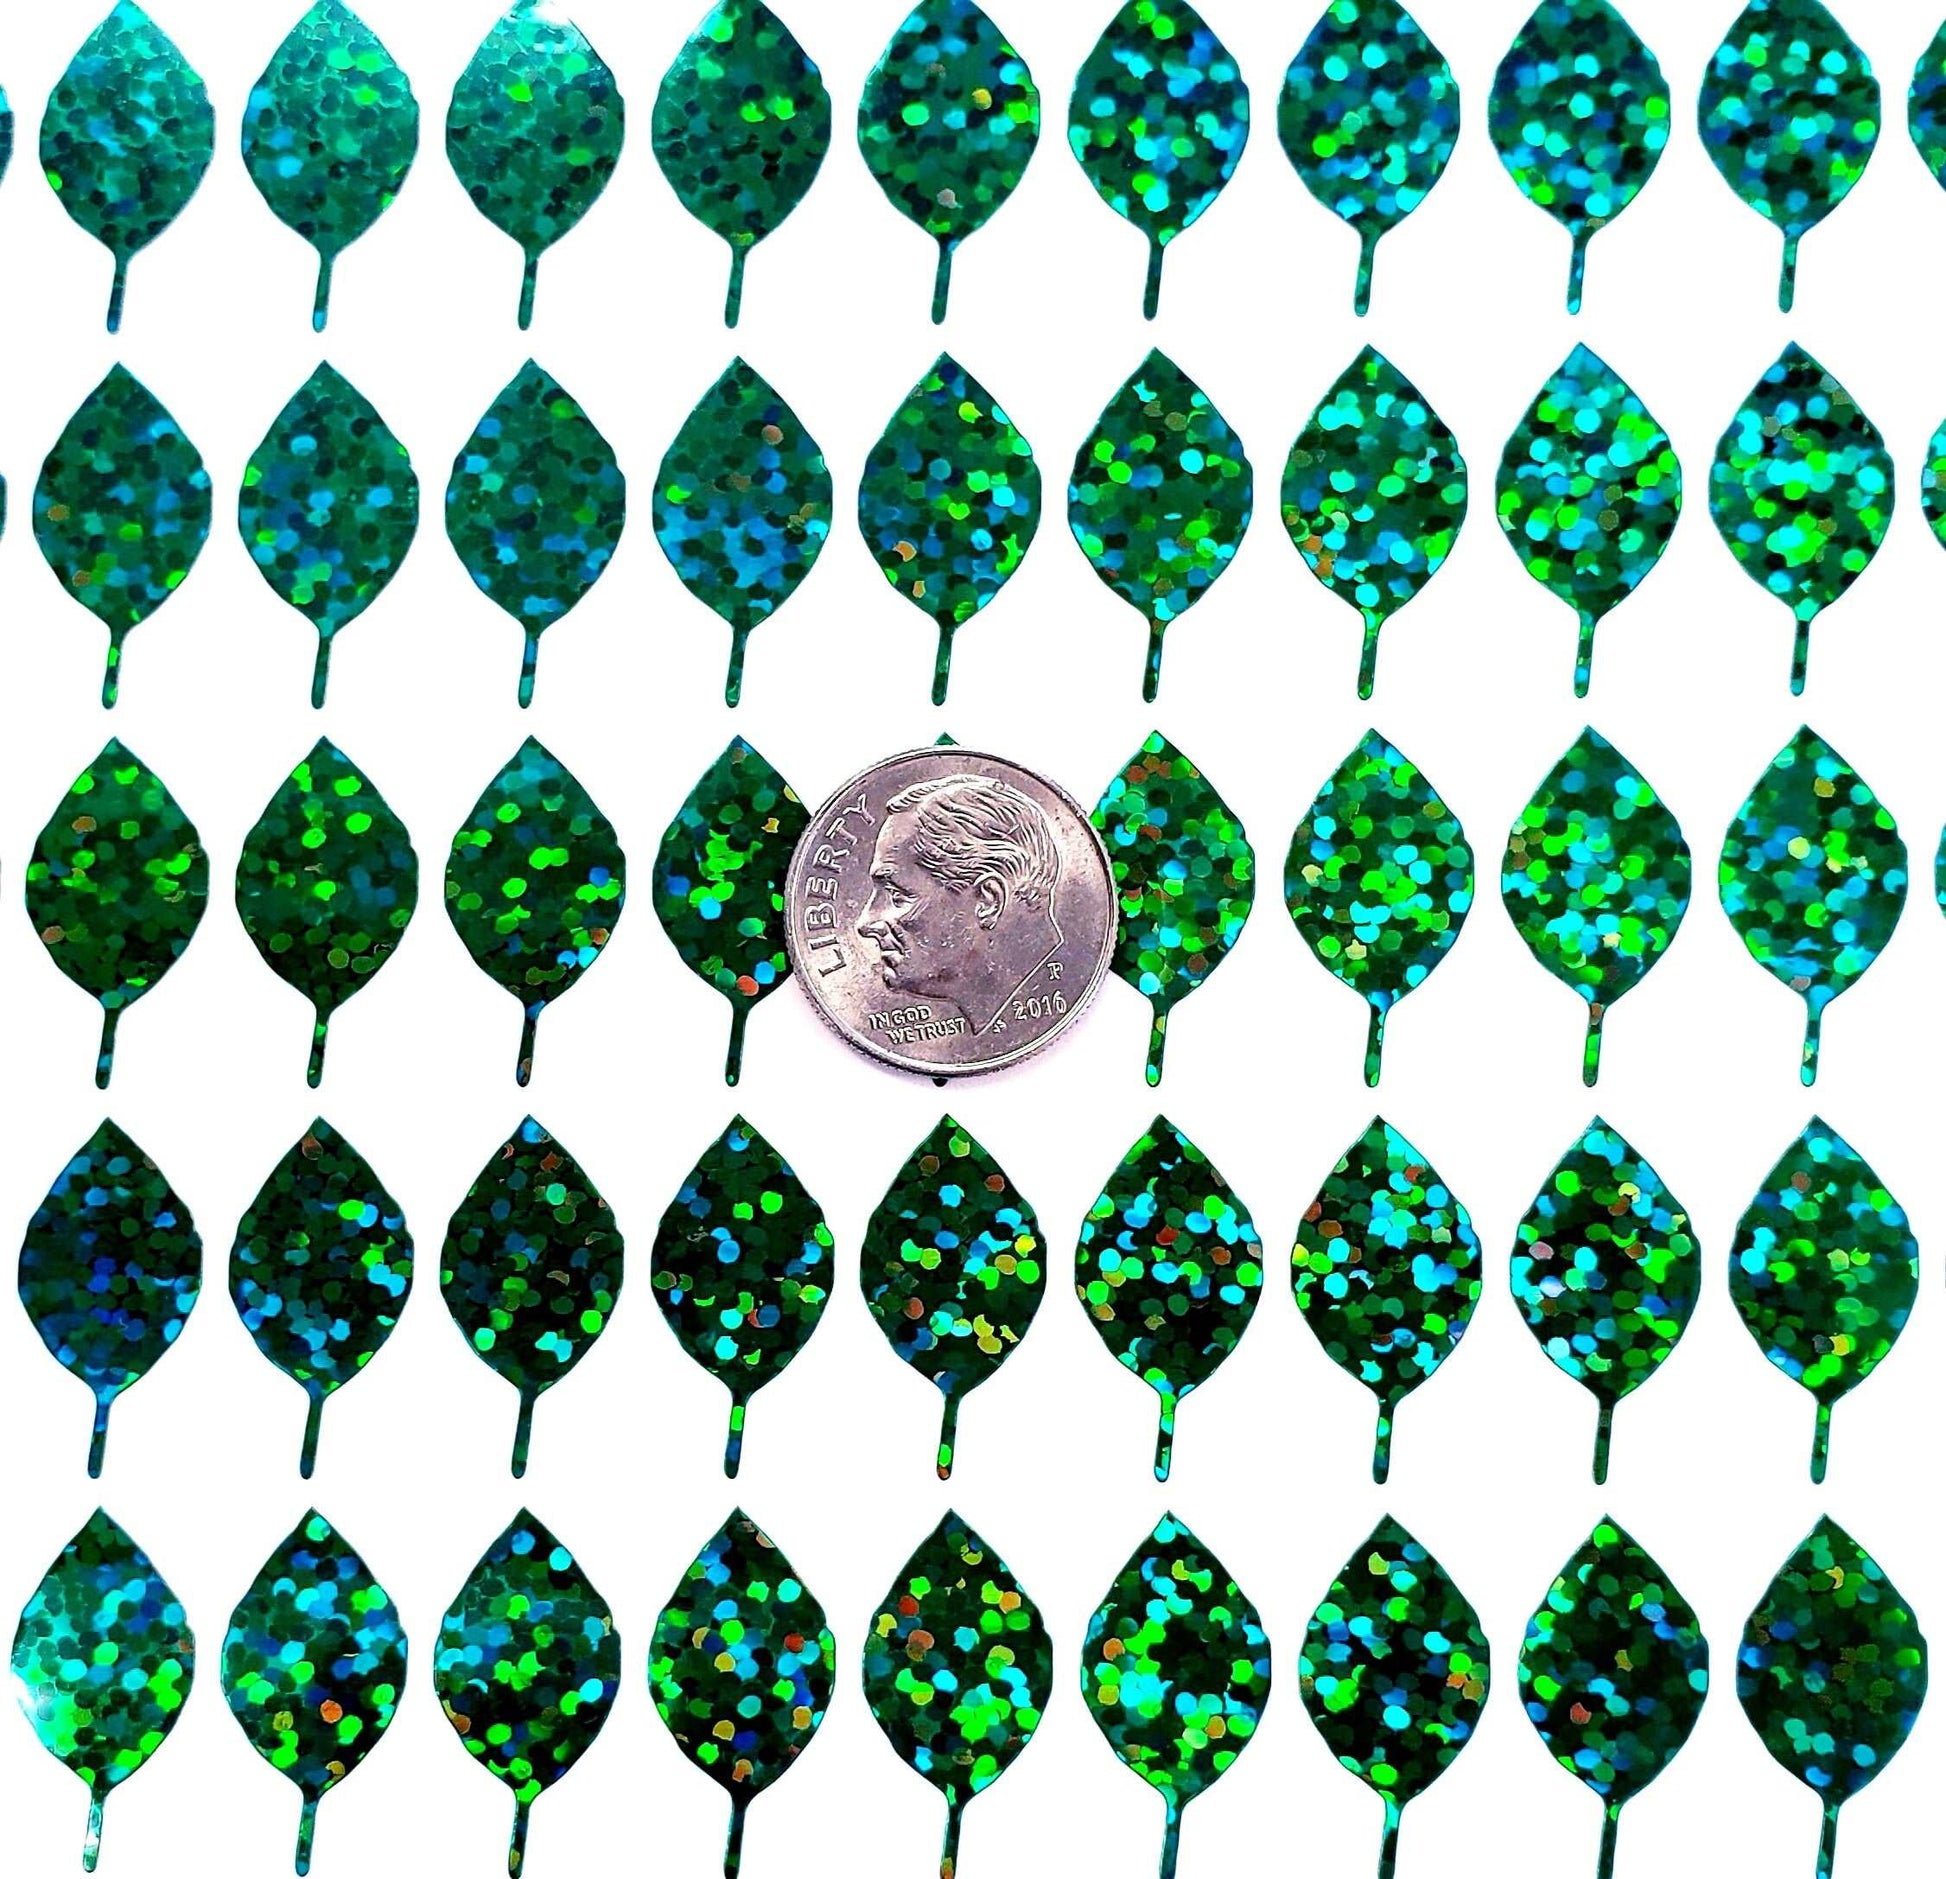 Leaf Stickers, set of 50 or 100 sparkly small green leaf decals for invitations, envelopes, place cards and scrapbooks.